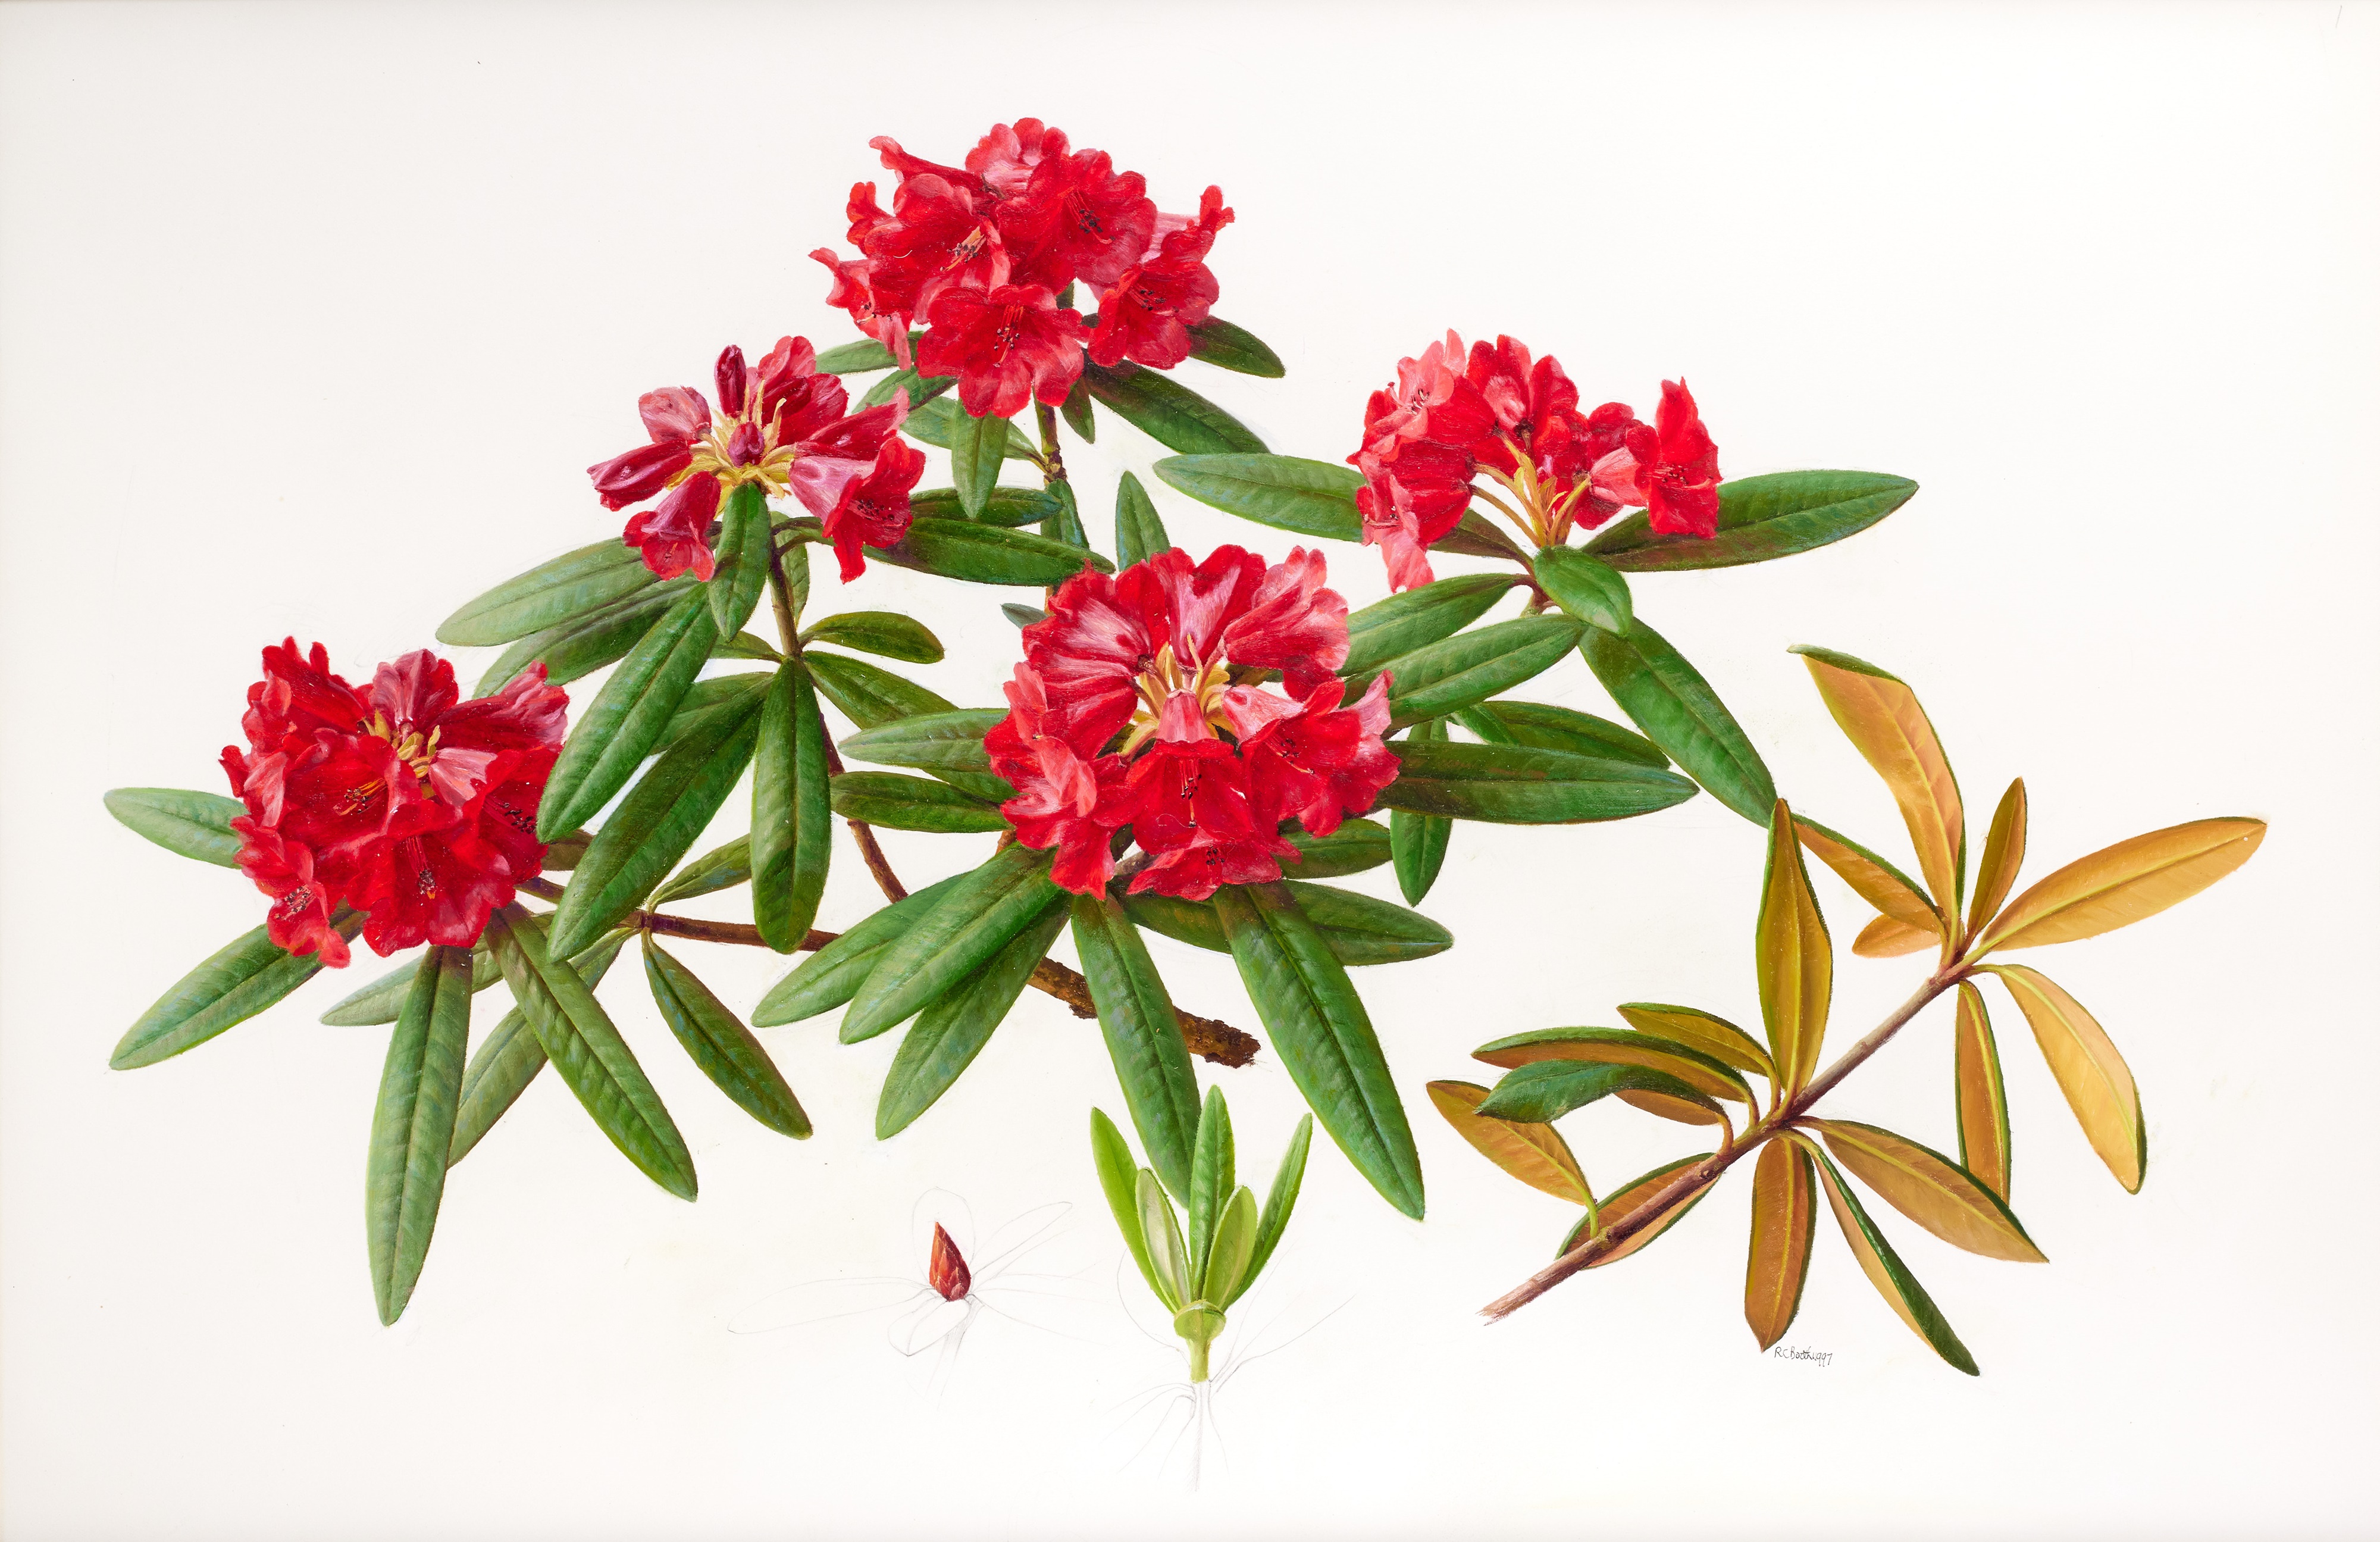 Lot 49 - Raymond Booth (1929-2015) “Rhododendron”